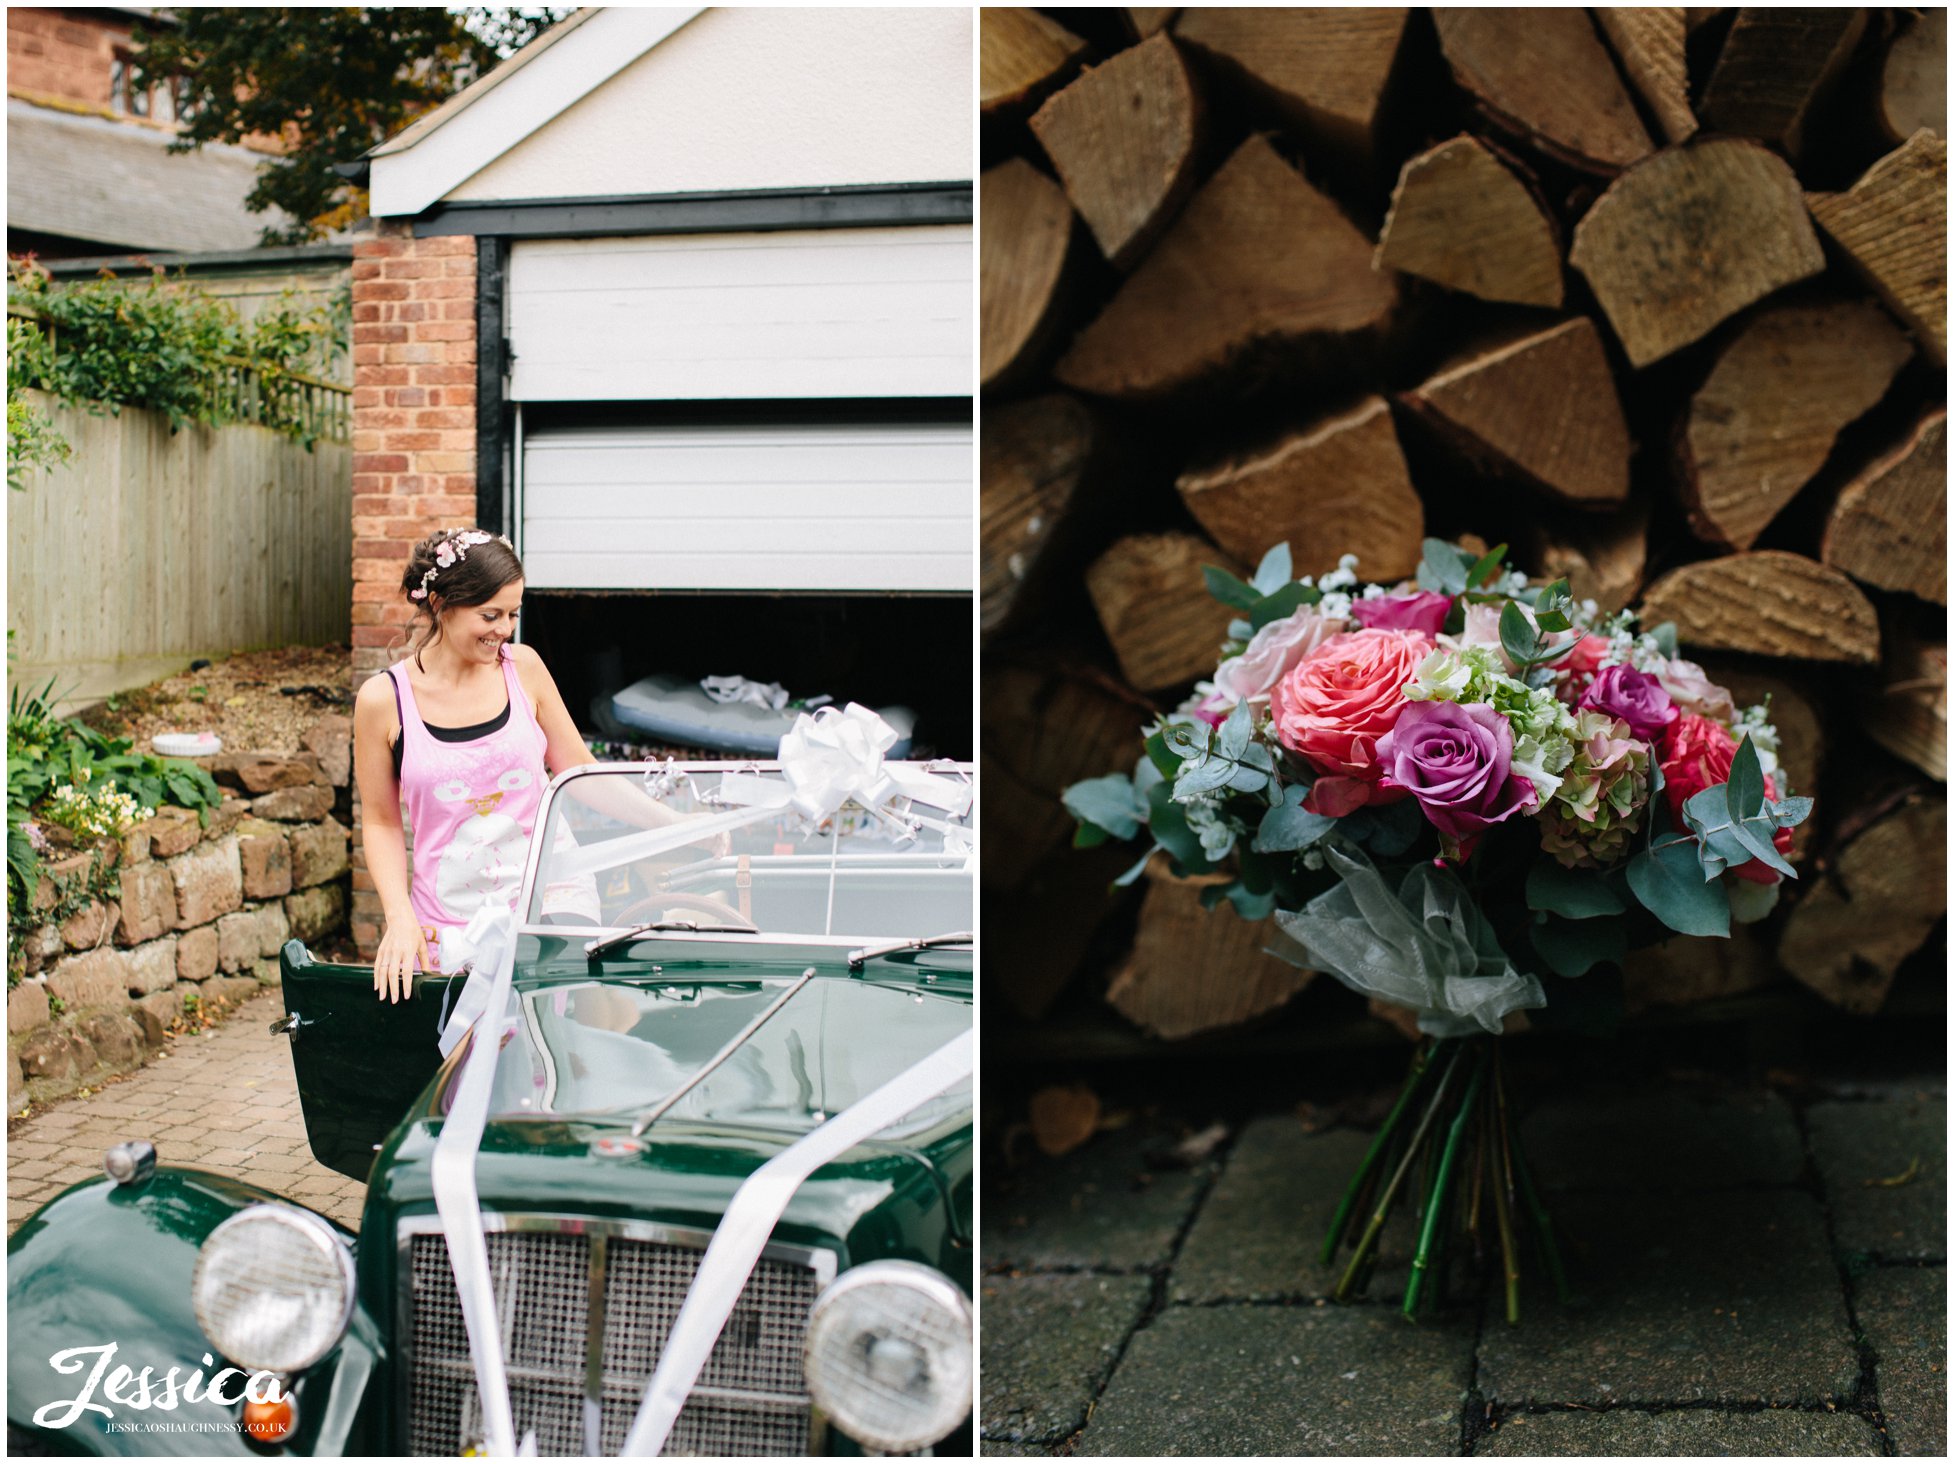 bridal bouquet photographed in front of chopped logs